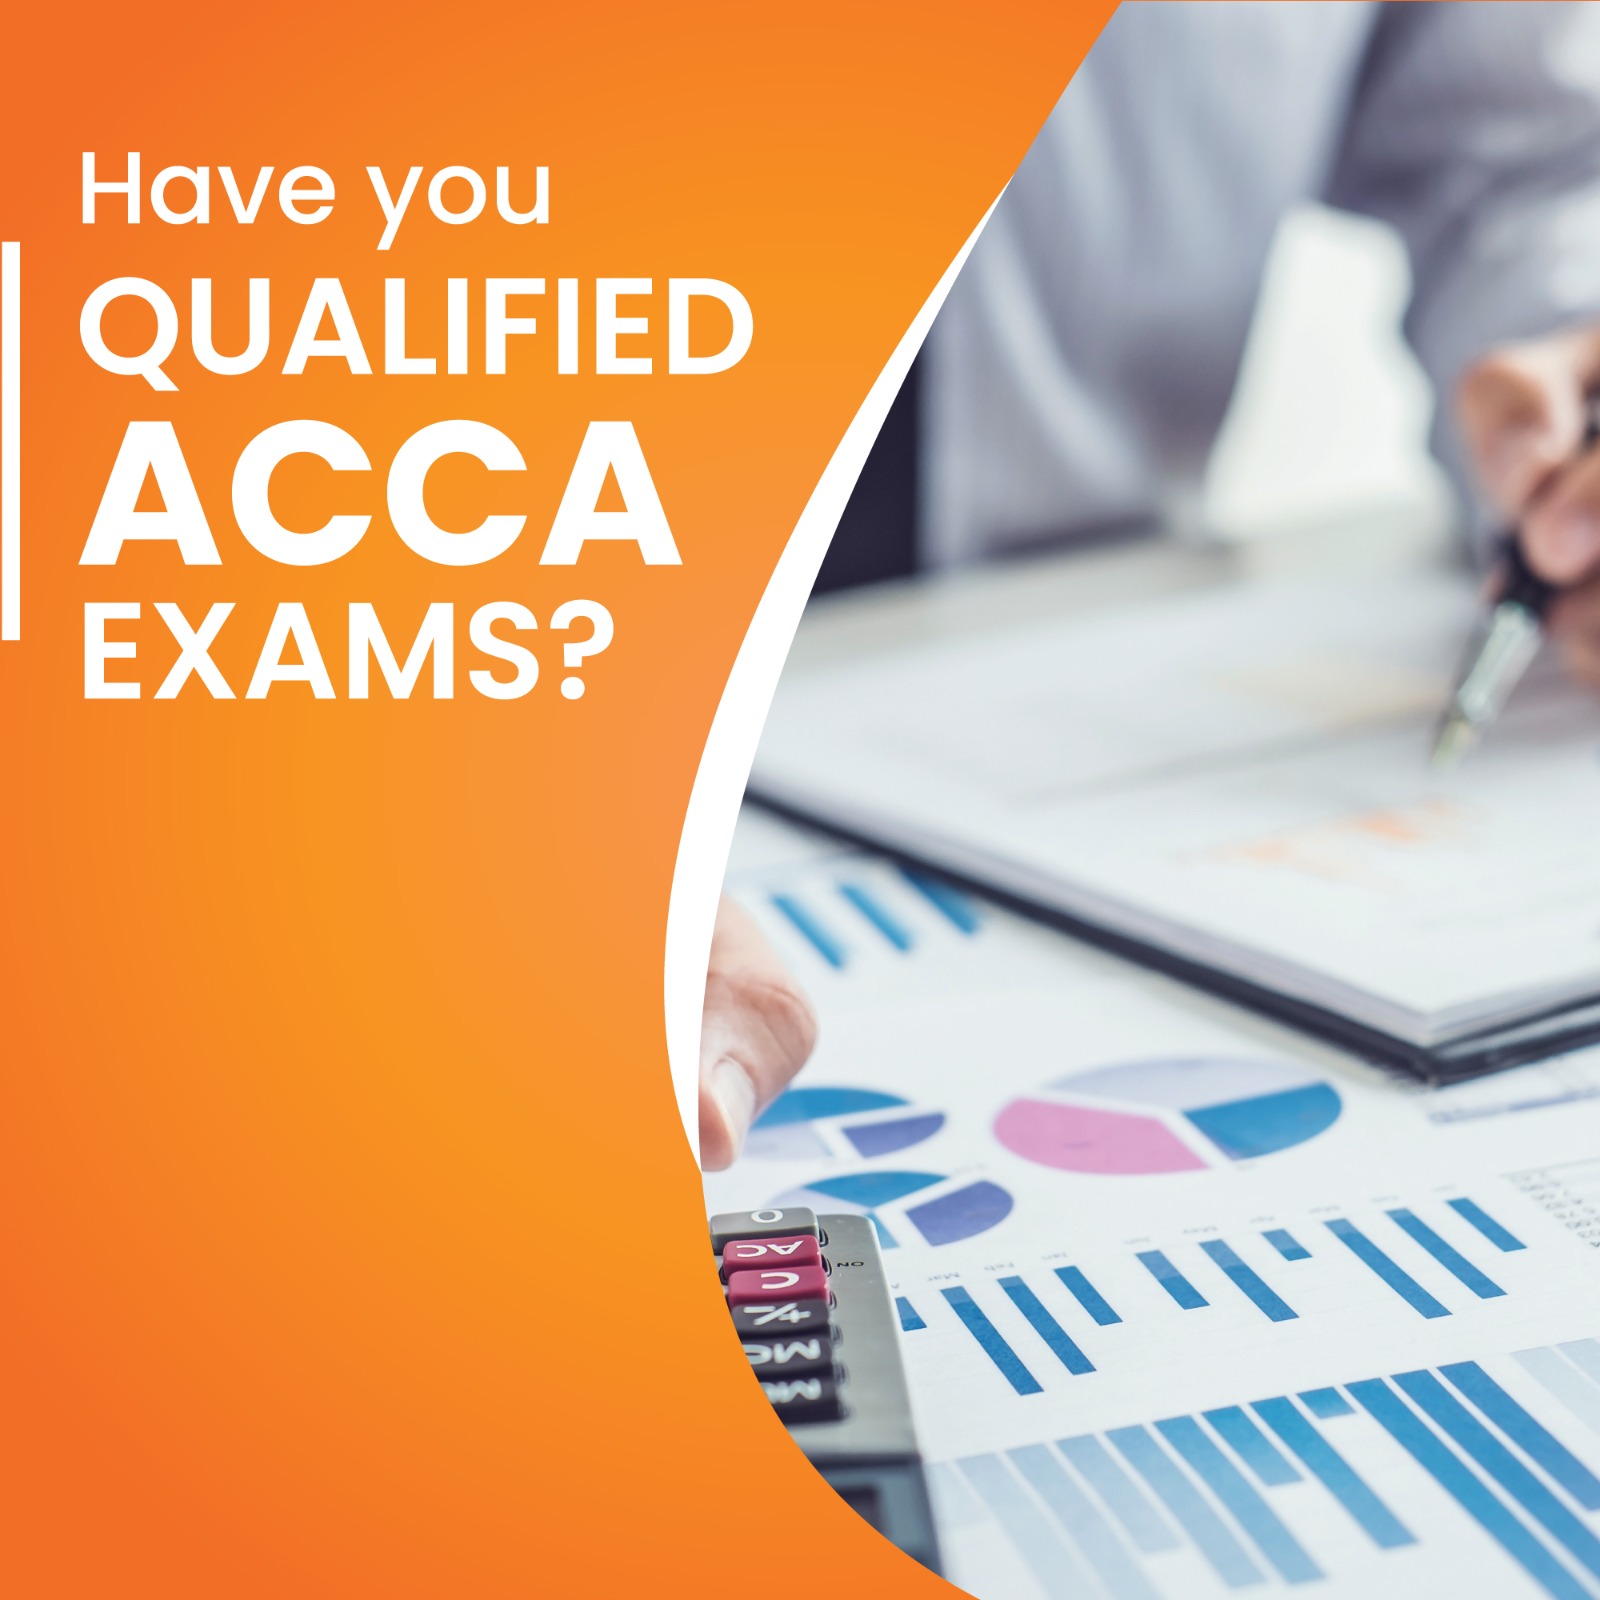 Have You Qualified ACCA Exam